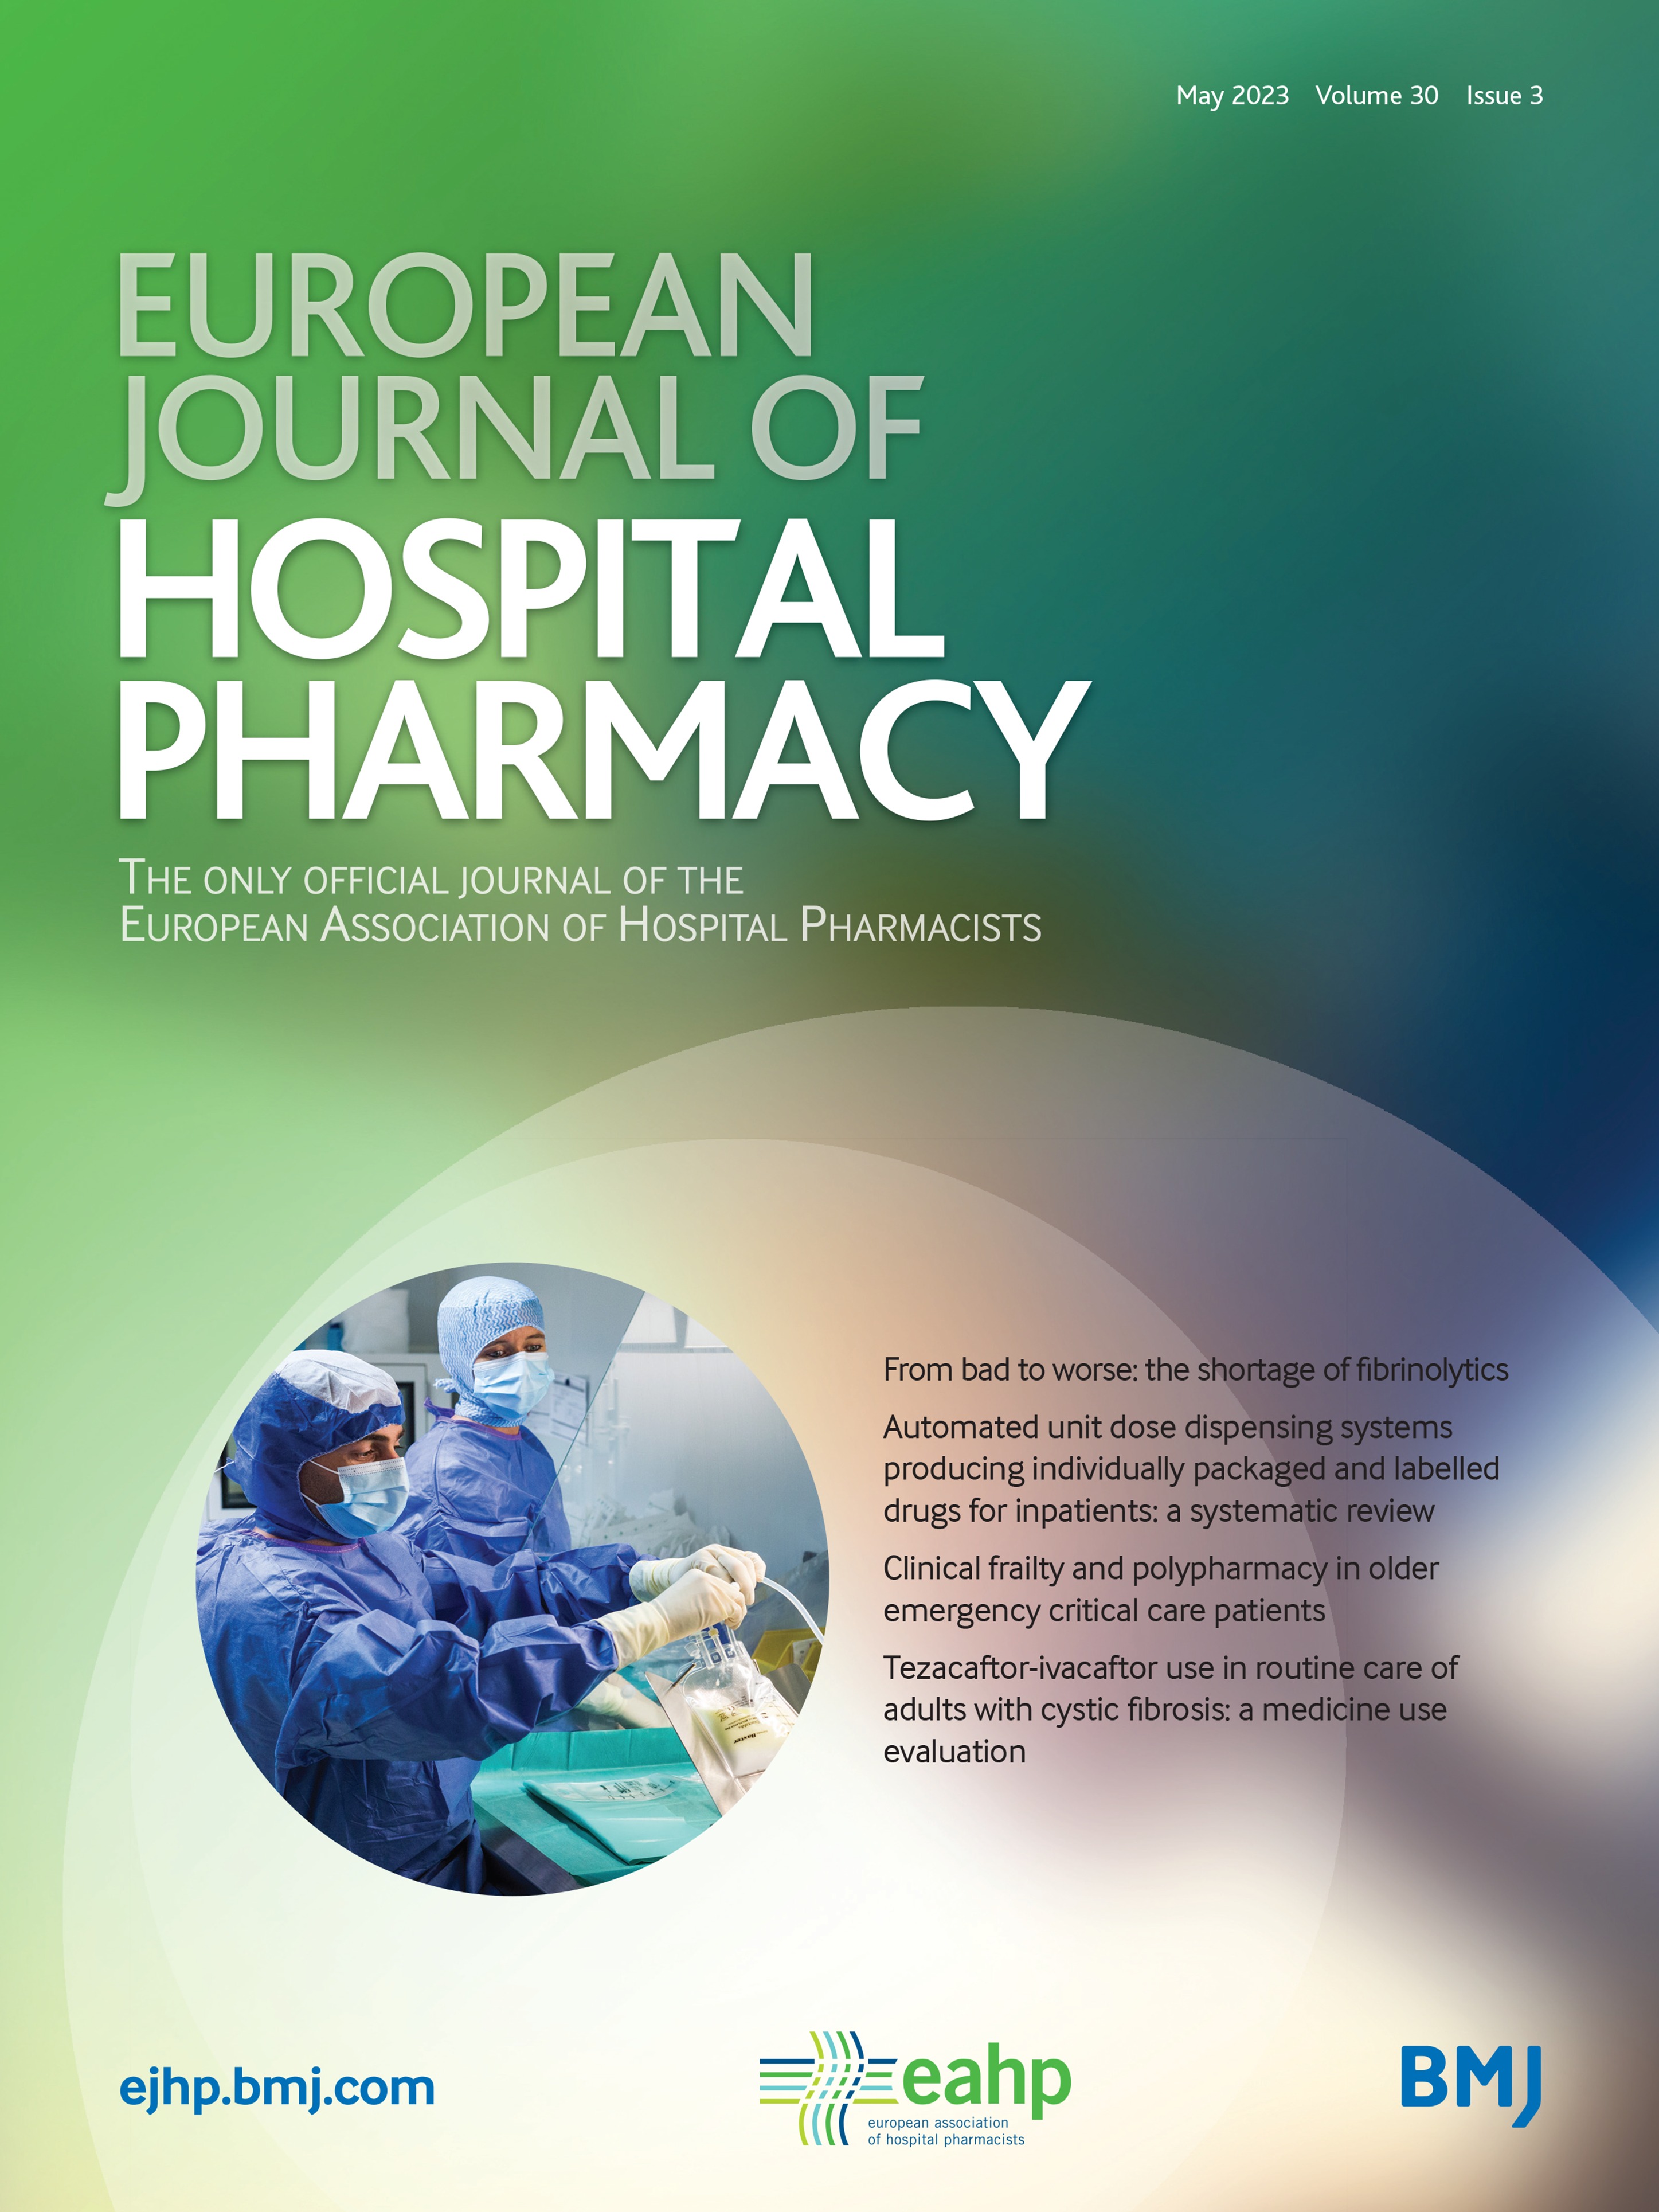 Automated unit dose dispensing systems producing individually packaged and labelled drugs for inpatients: a systematic review